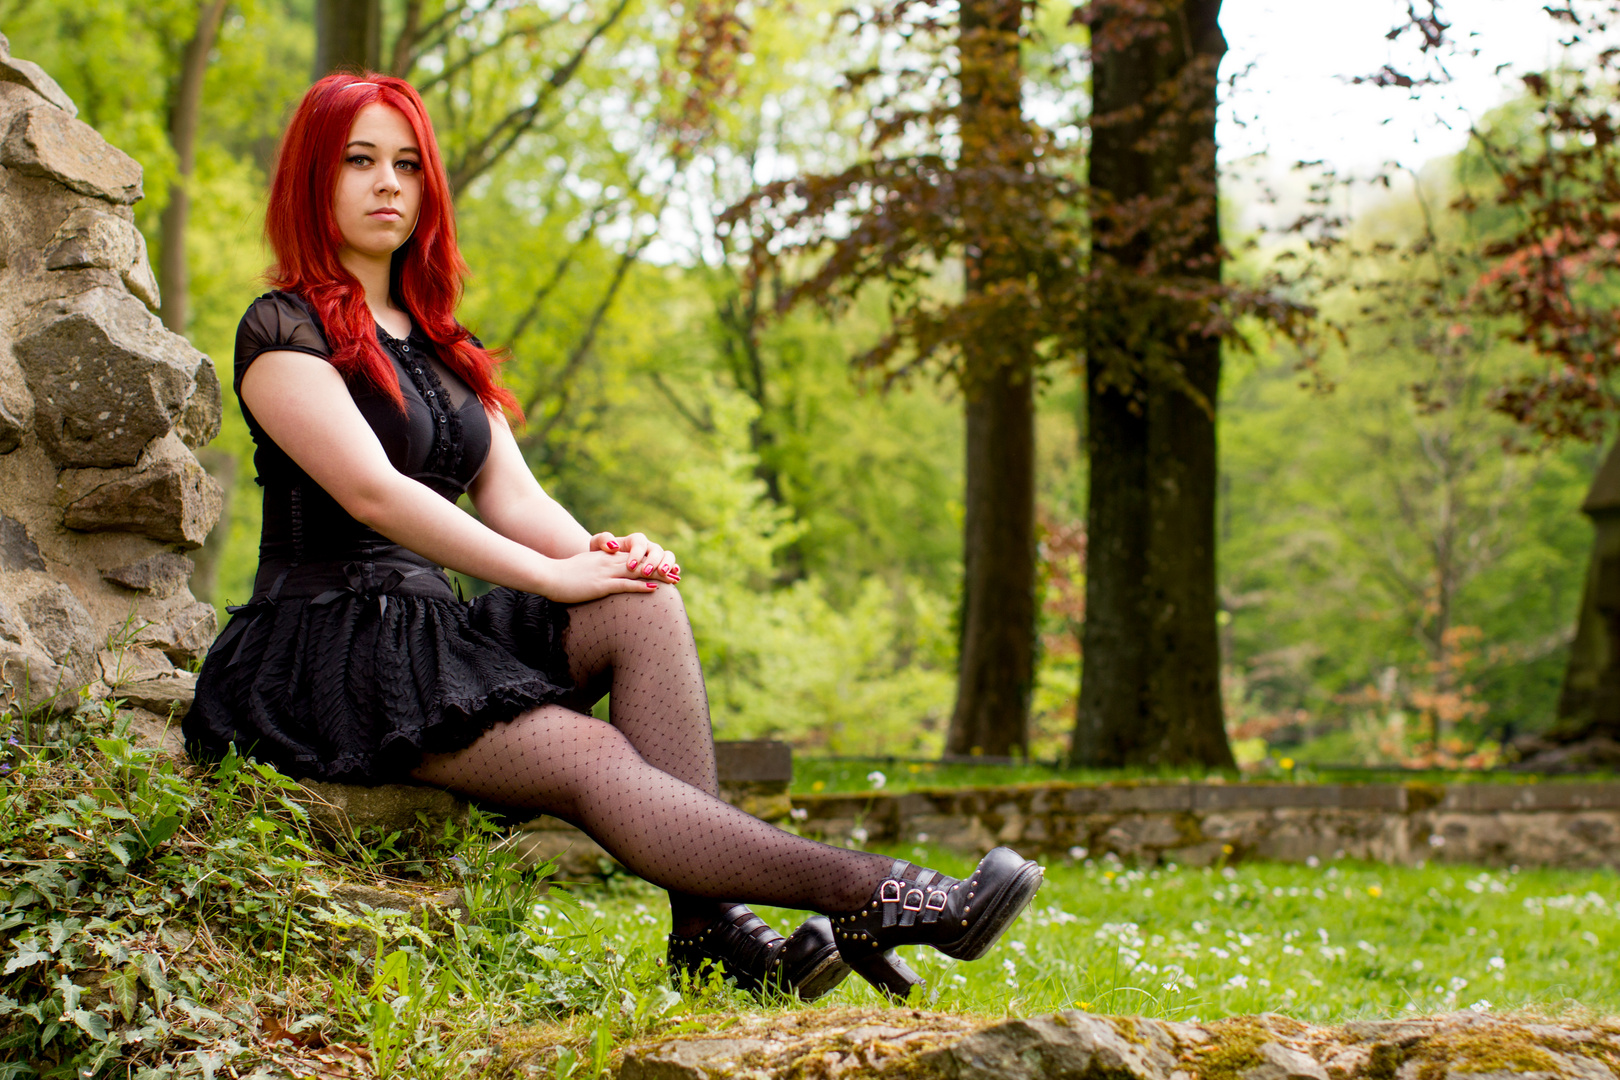 Fotoshooting am Kloster Heisterbach